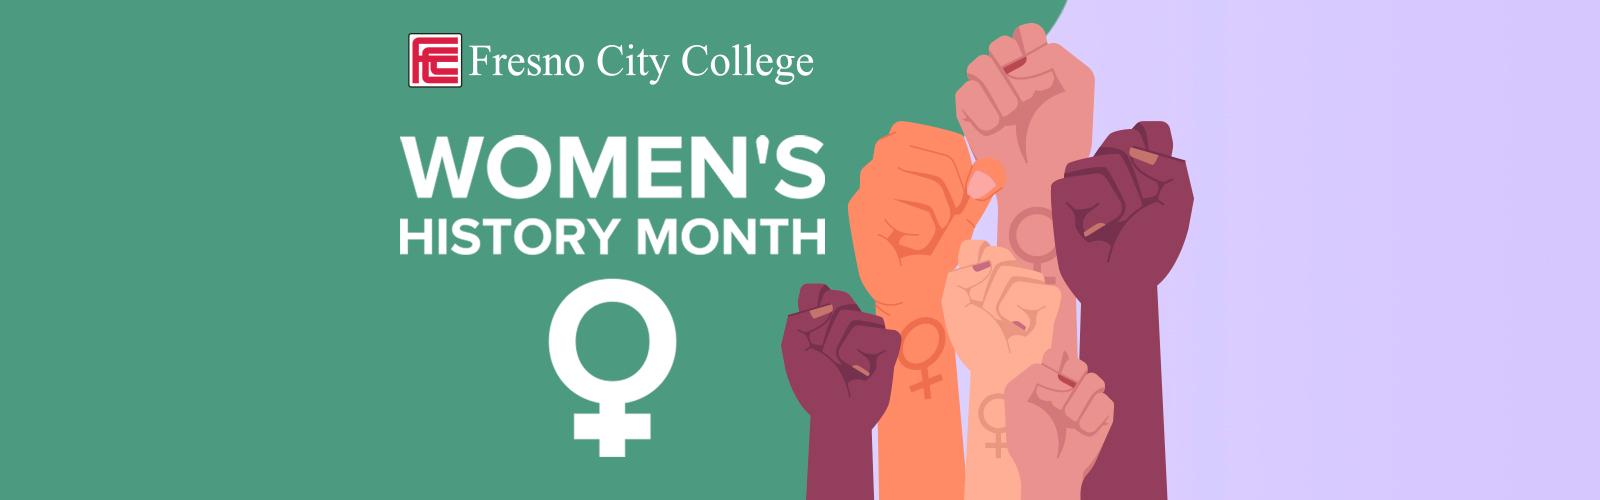 Women's History Month with fists raised